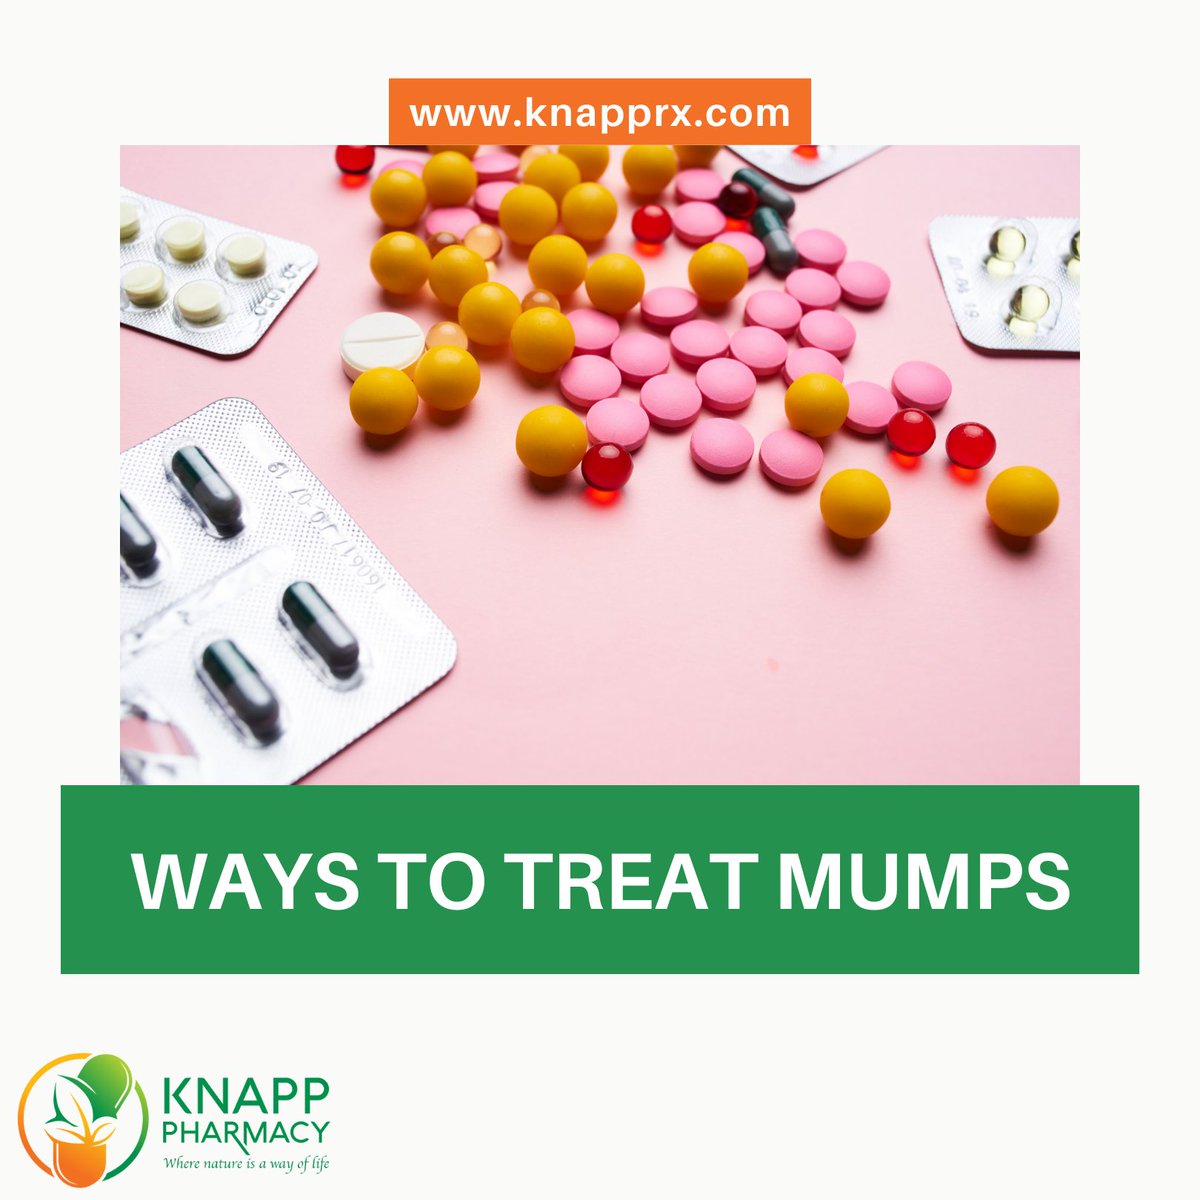 5 Ways to treat mumps:

1. Rest.
2. Pain relievers that you can get without a prescription such as ibuprofen.
3. A cold or warm cloth for swollen salivary glands.
4. A cold cloth or ice pack for swollen testicles.
5. Drinking plenty of fluids.

#usa #brooklynny